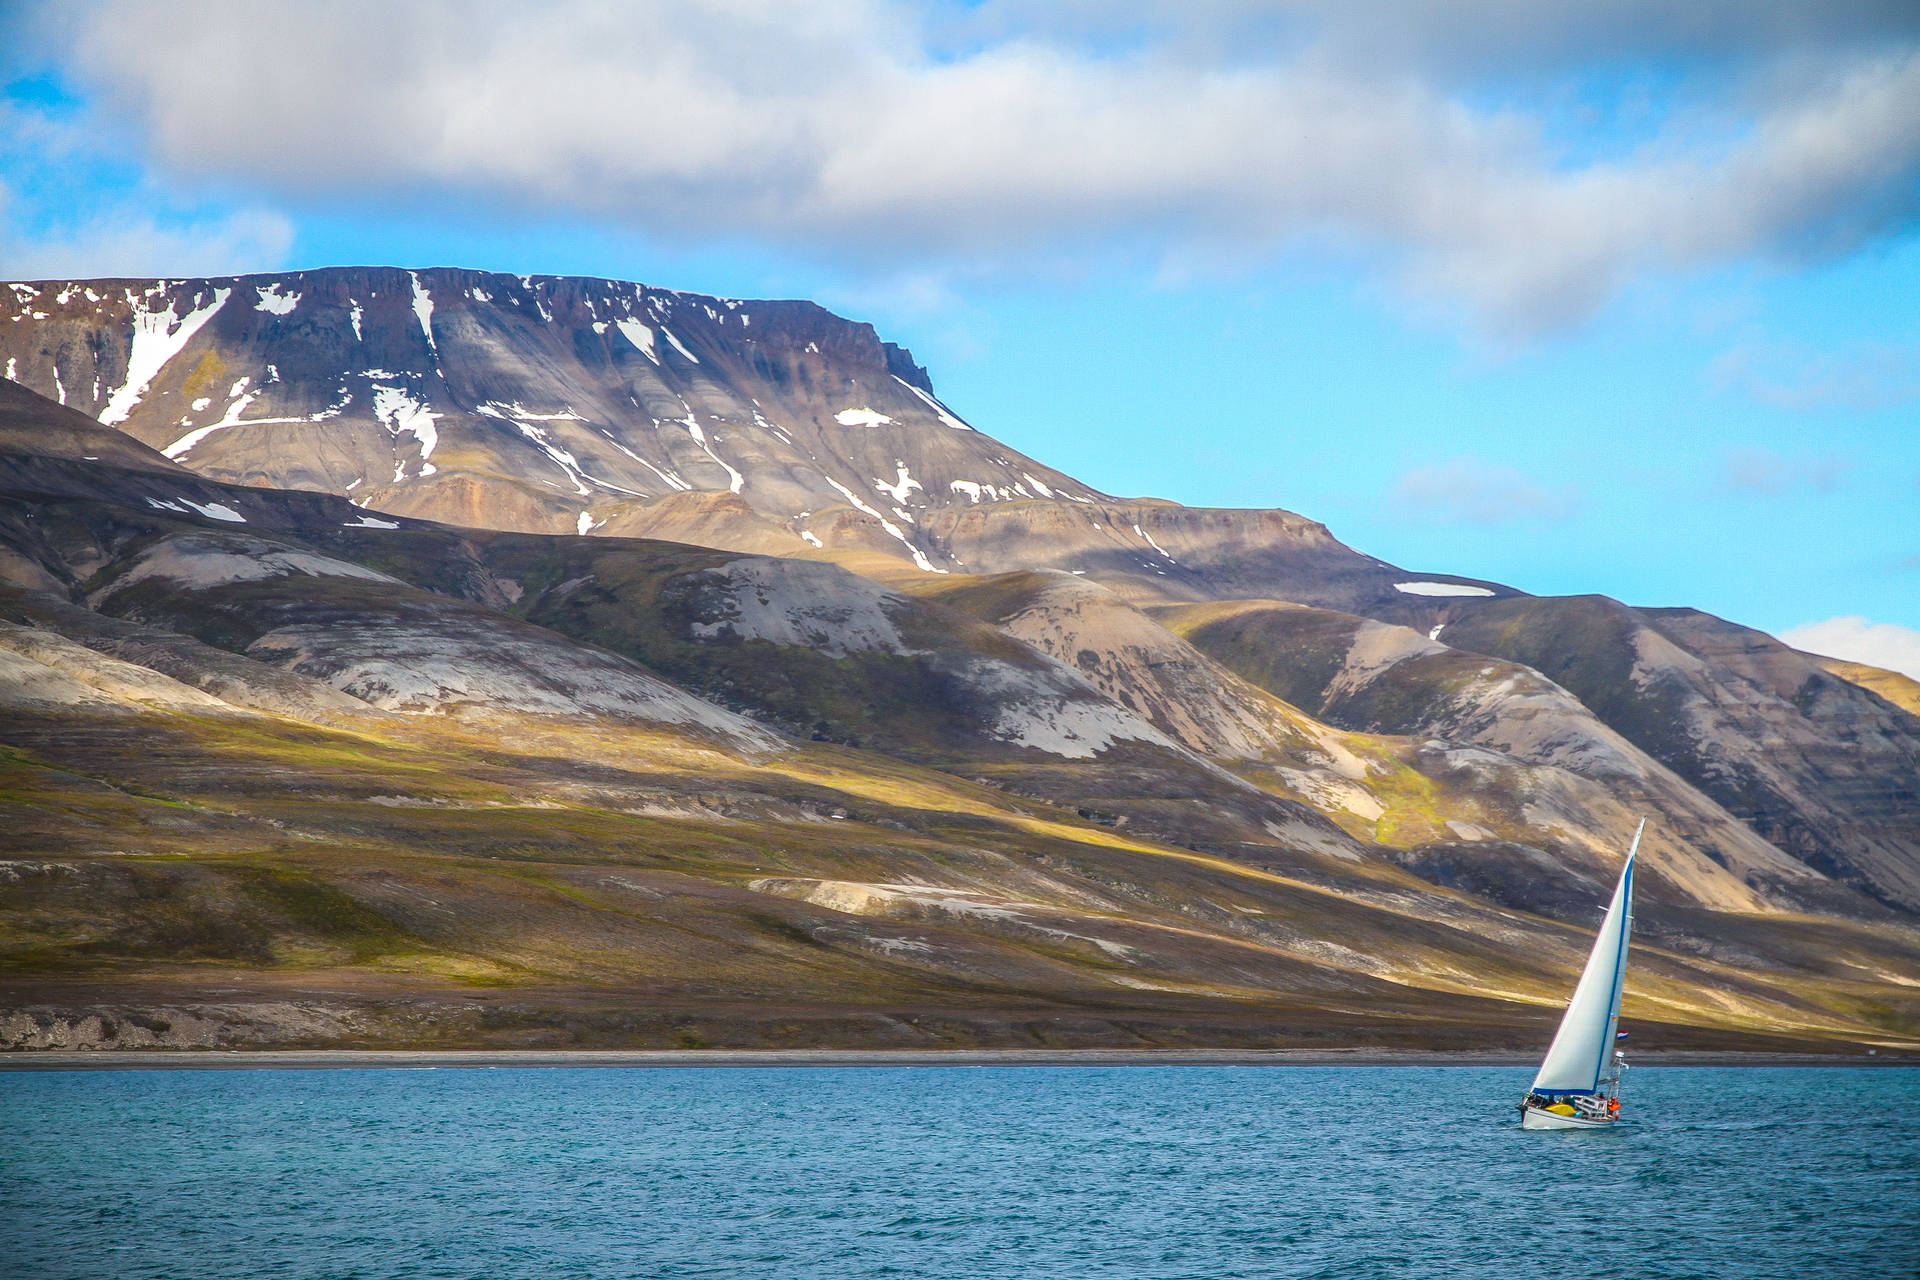 Sailing Boat Against Snow-capped Mountain Background